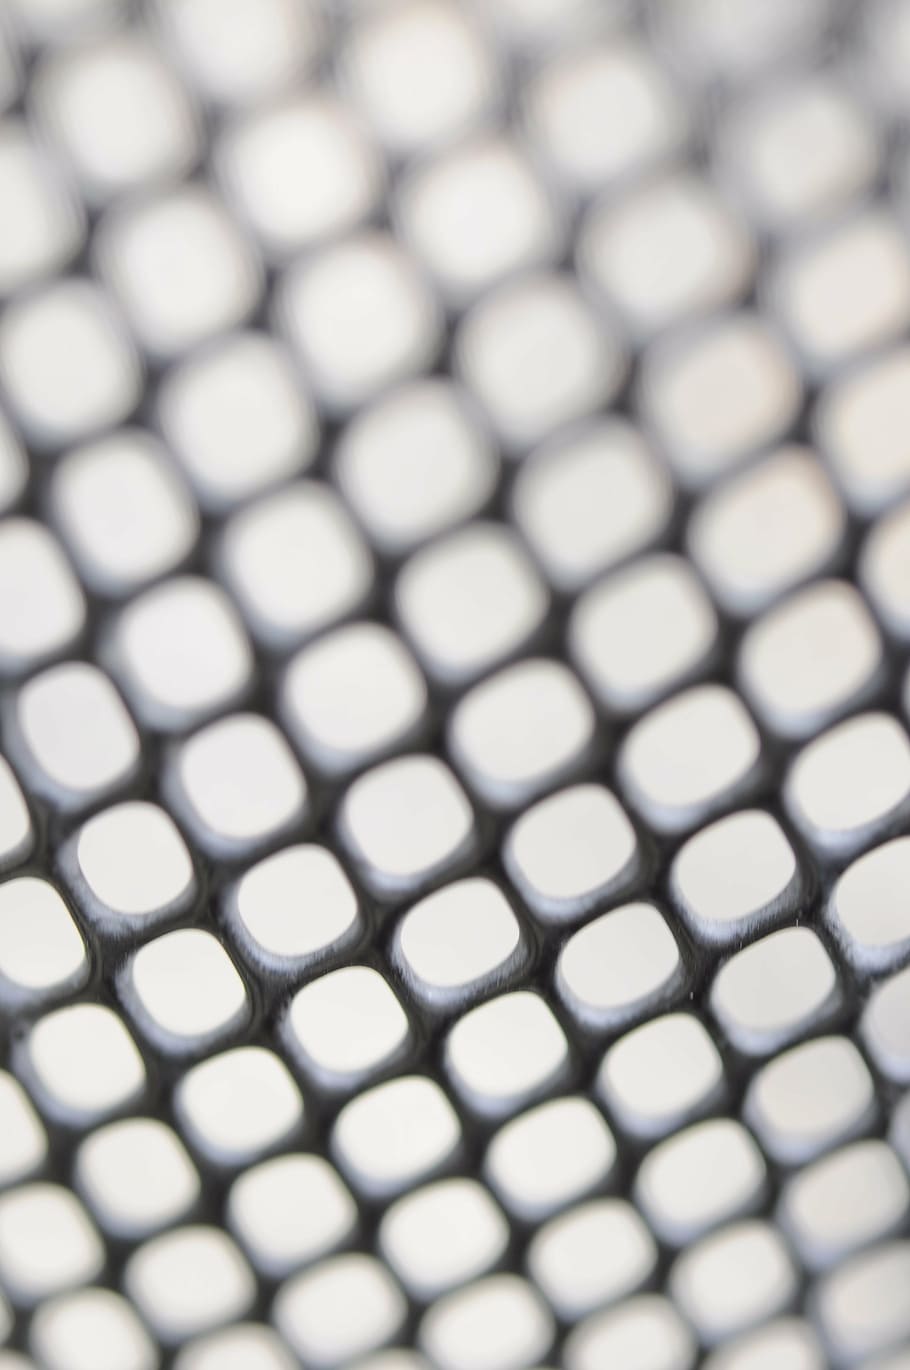 pattern, the grid, blur, backgrounds, full frame, repetition, textured, close-up, metal, design